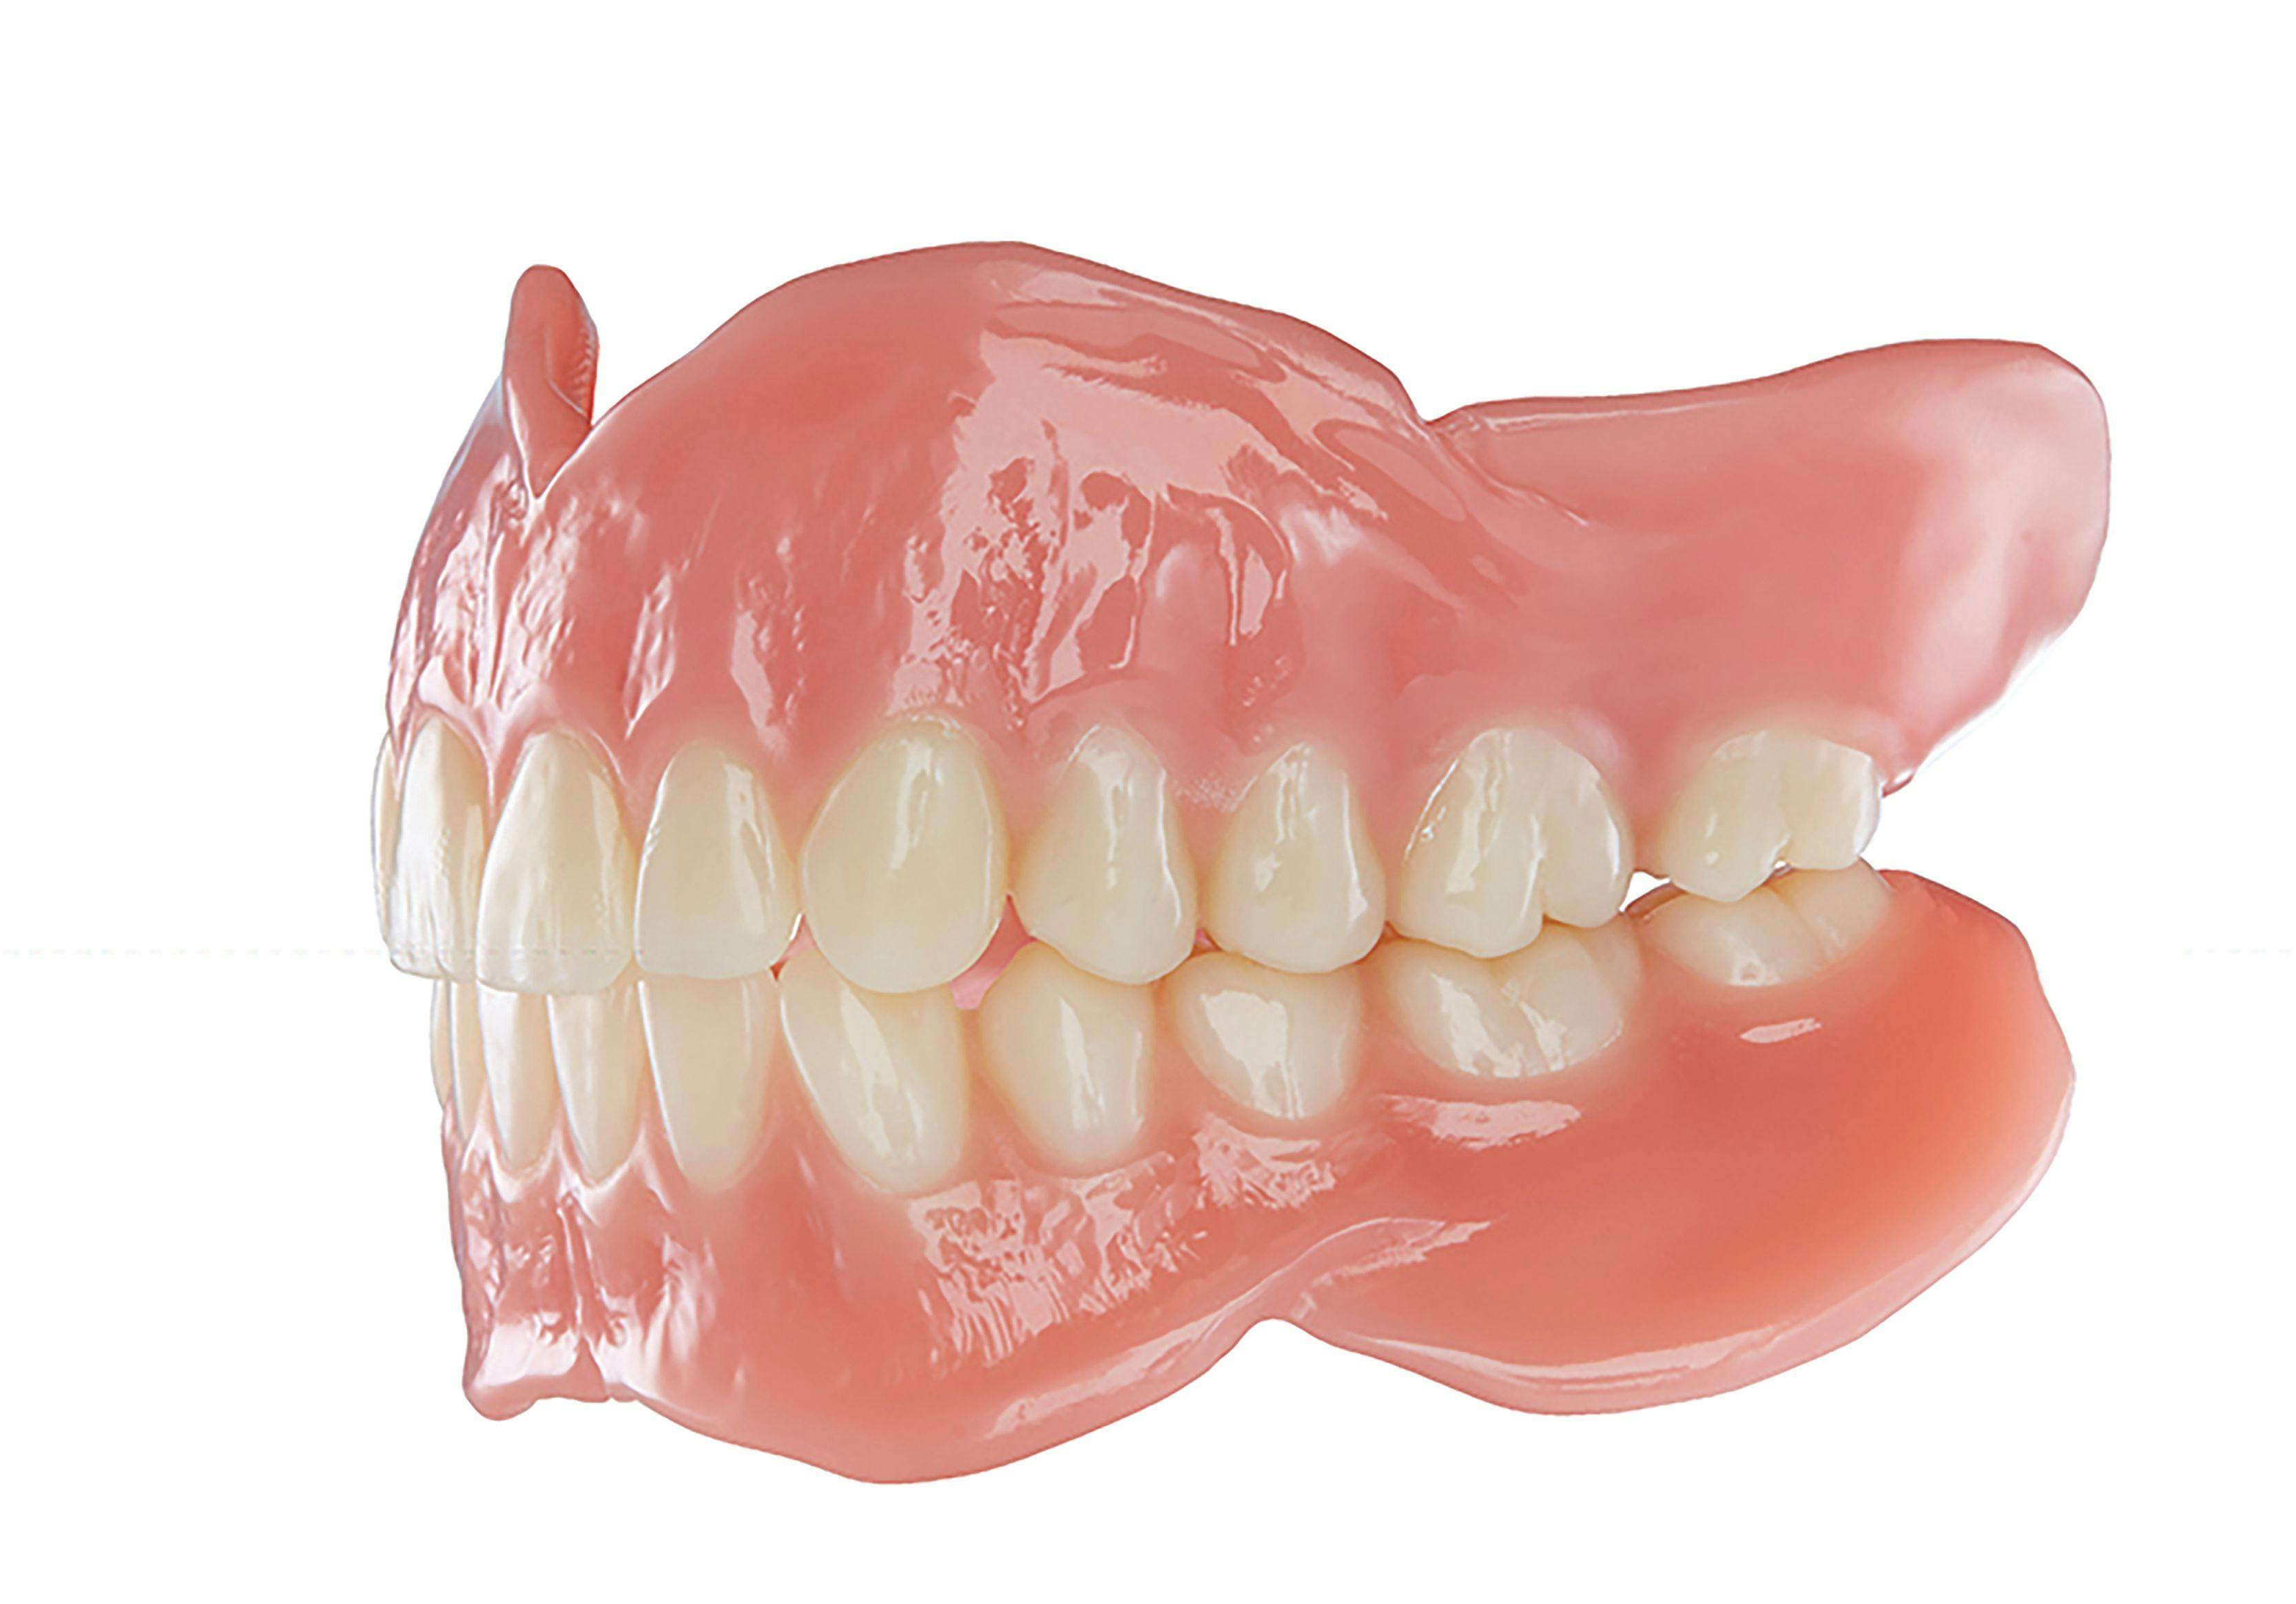 Dentures fabricated using the Baltic Denture System